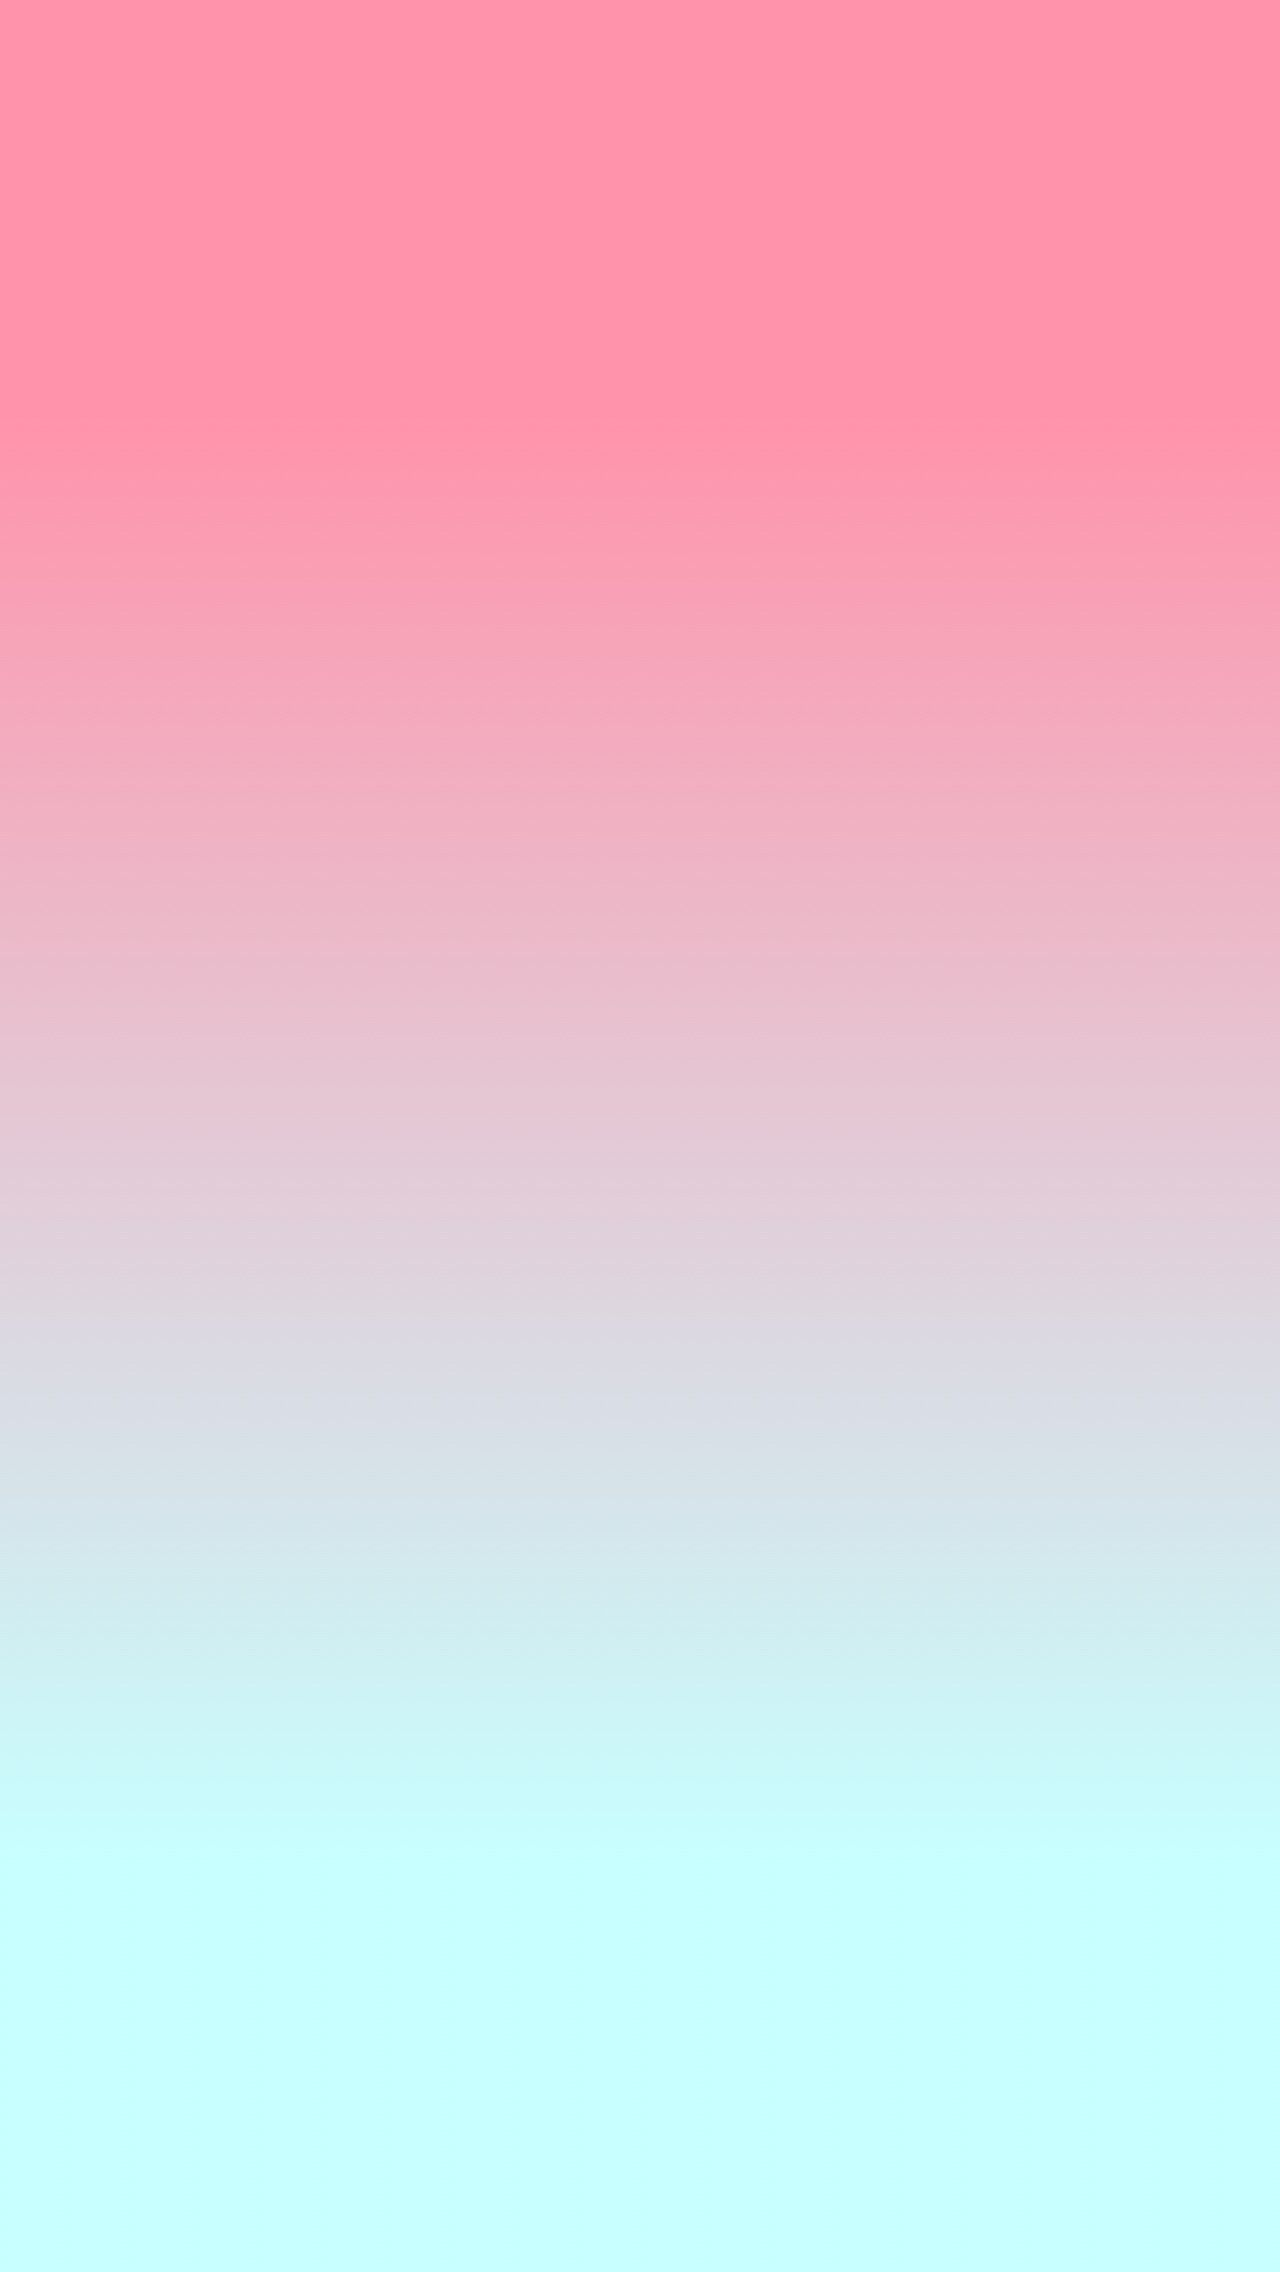 1280x2272 blue and pink ombre wallpaper | Colorful backgrounds, Free background images, Ombre wallpapers